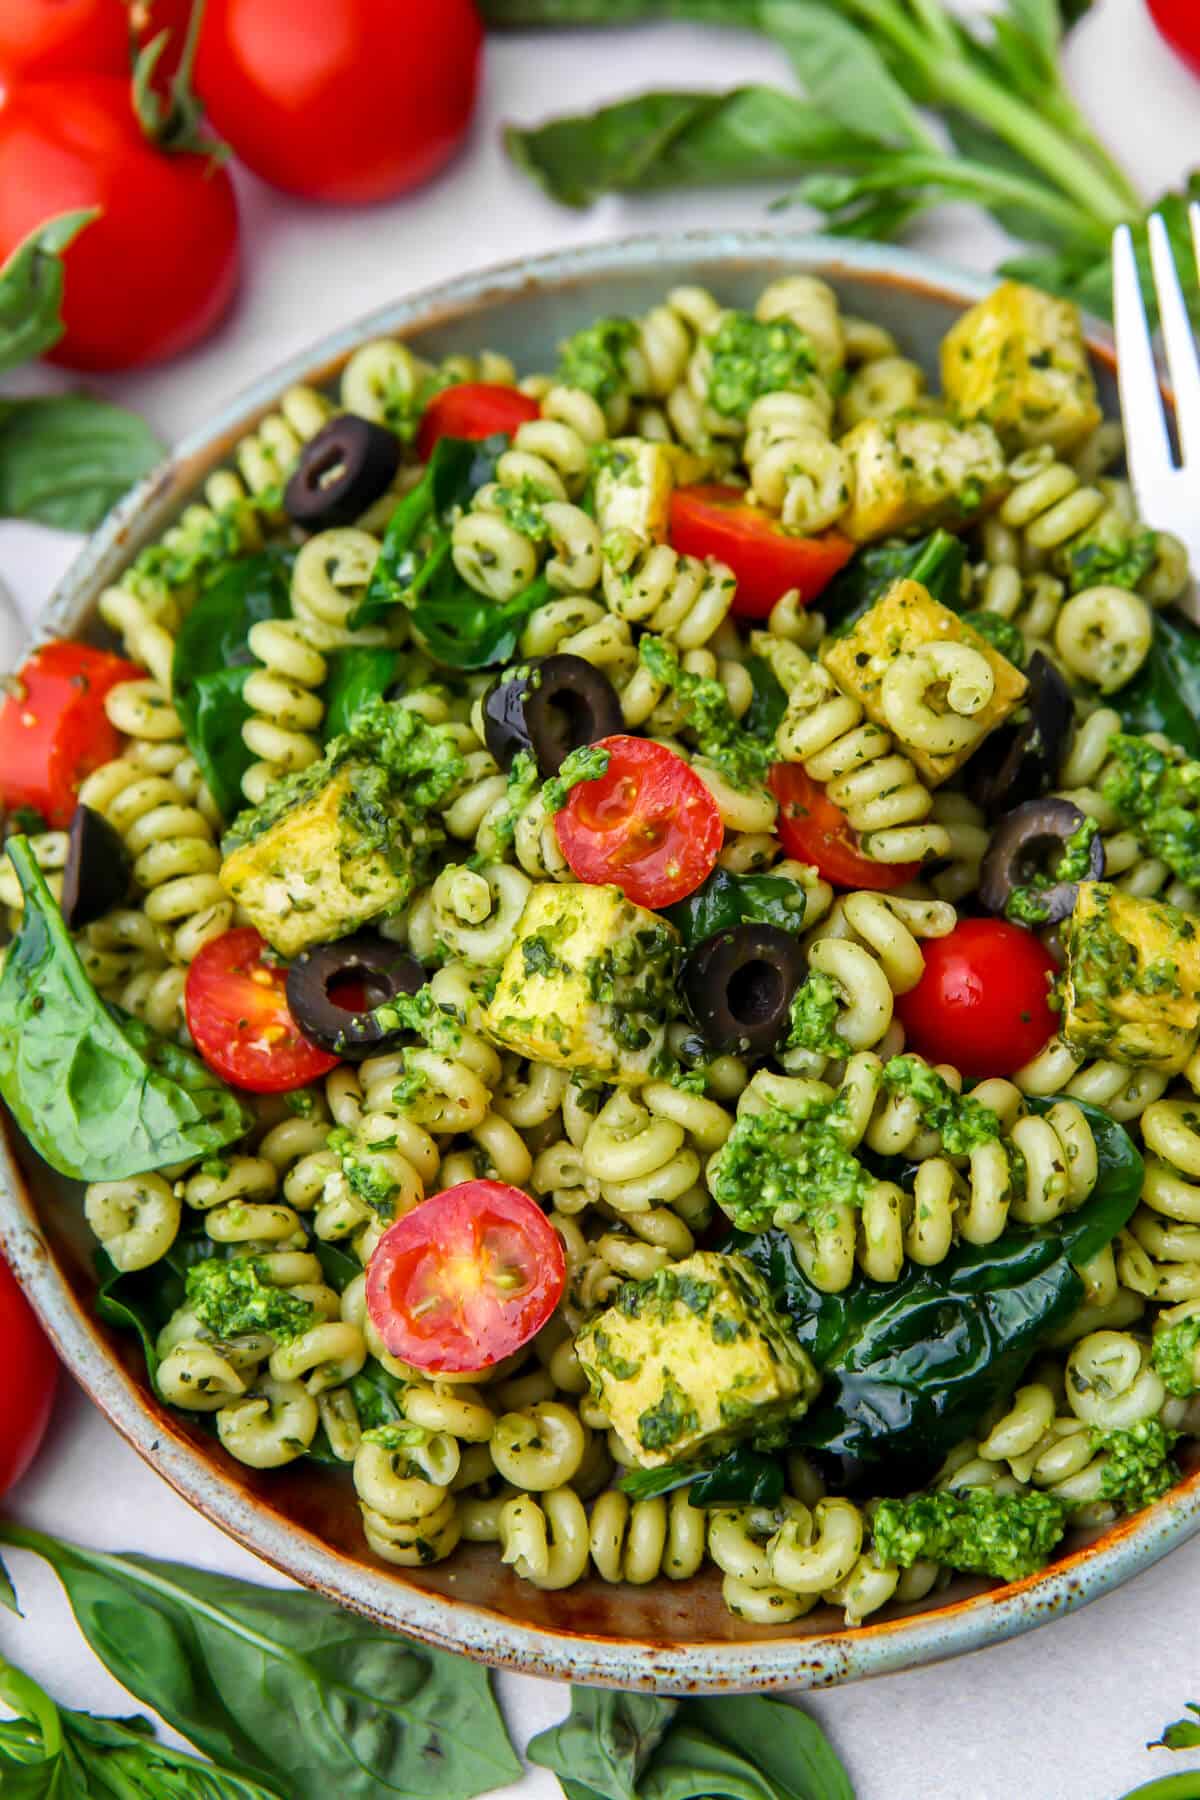 A plate full of vegan pesto pasta with cherry tomatoes, black olives, spinach, and tofu.